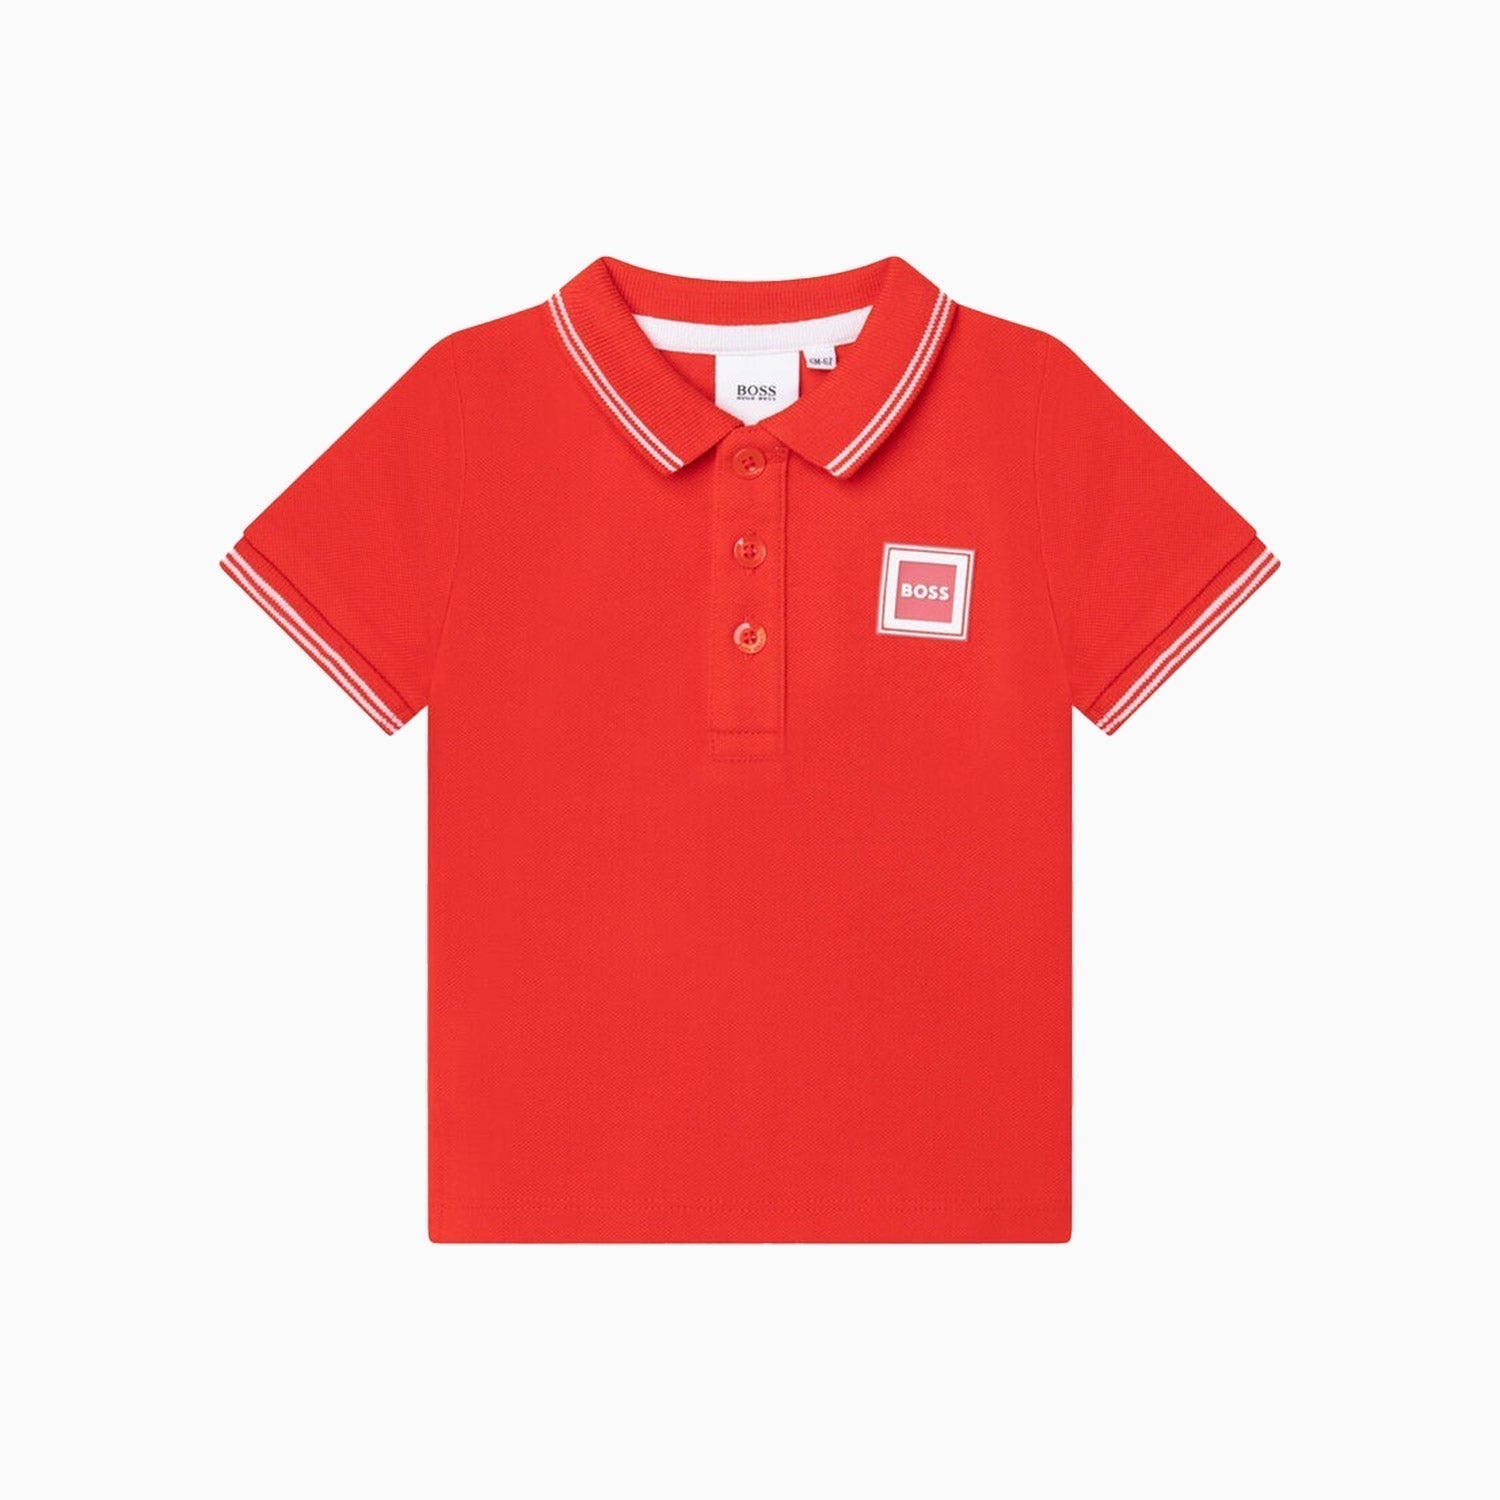 Hugo Boss Kid's Polo T Shirt Toddlers - Color: Red - Kids Premium Clothing -